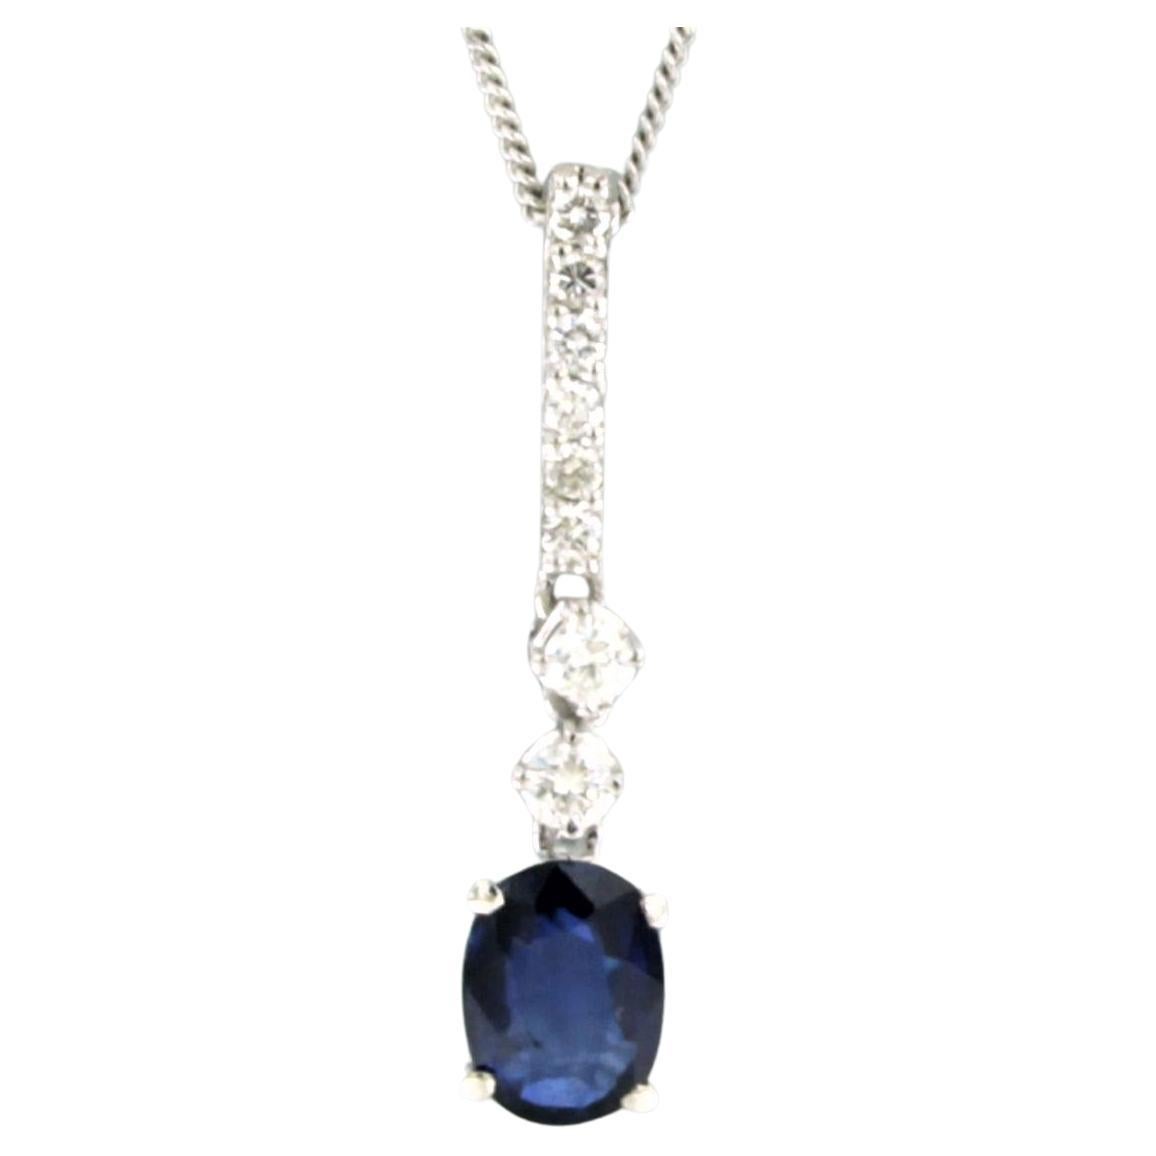 Necklace and pendant set with sapphire and diamonds 14k white gold